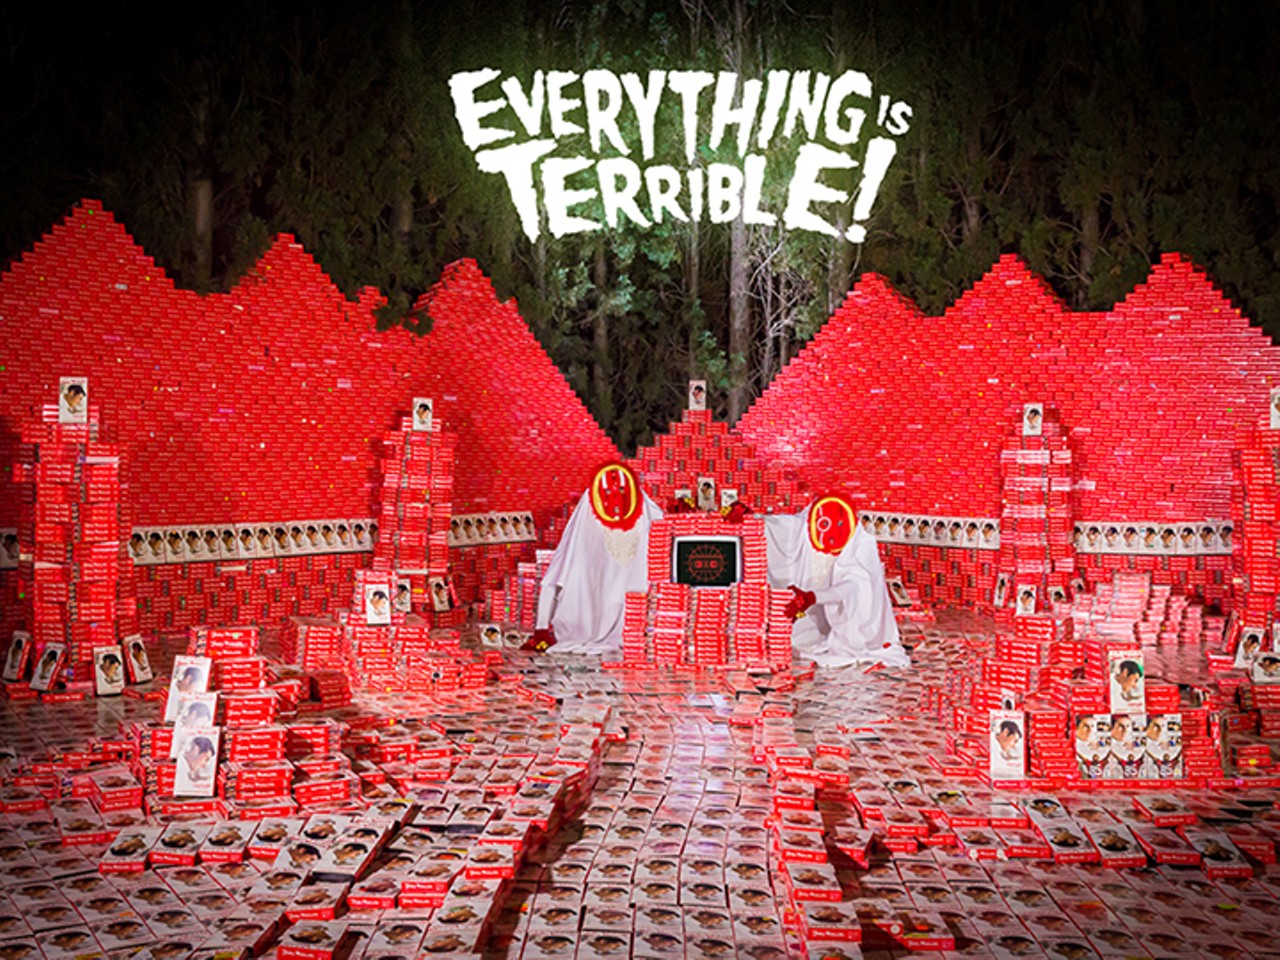 Thursday, March 15Everything Is Terrible! at Will's Pub